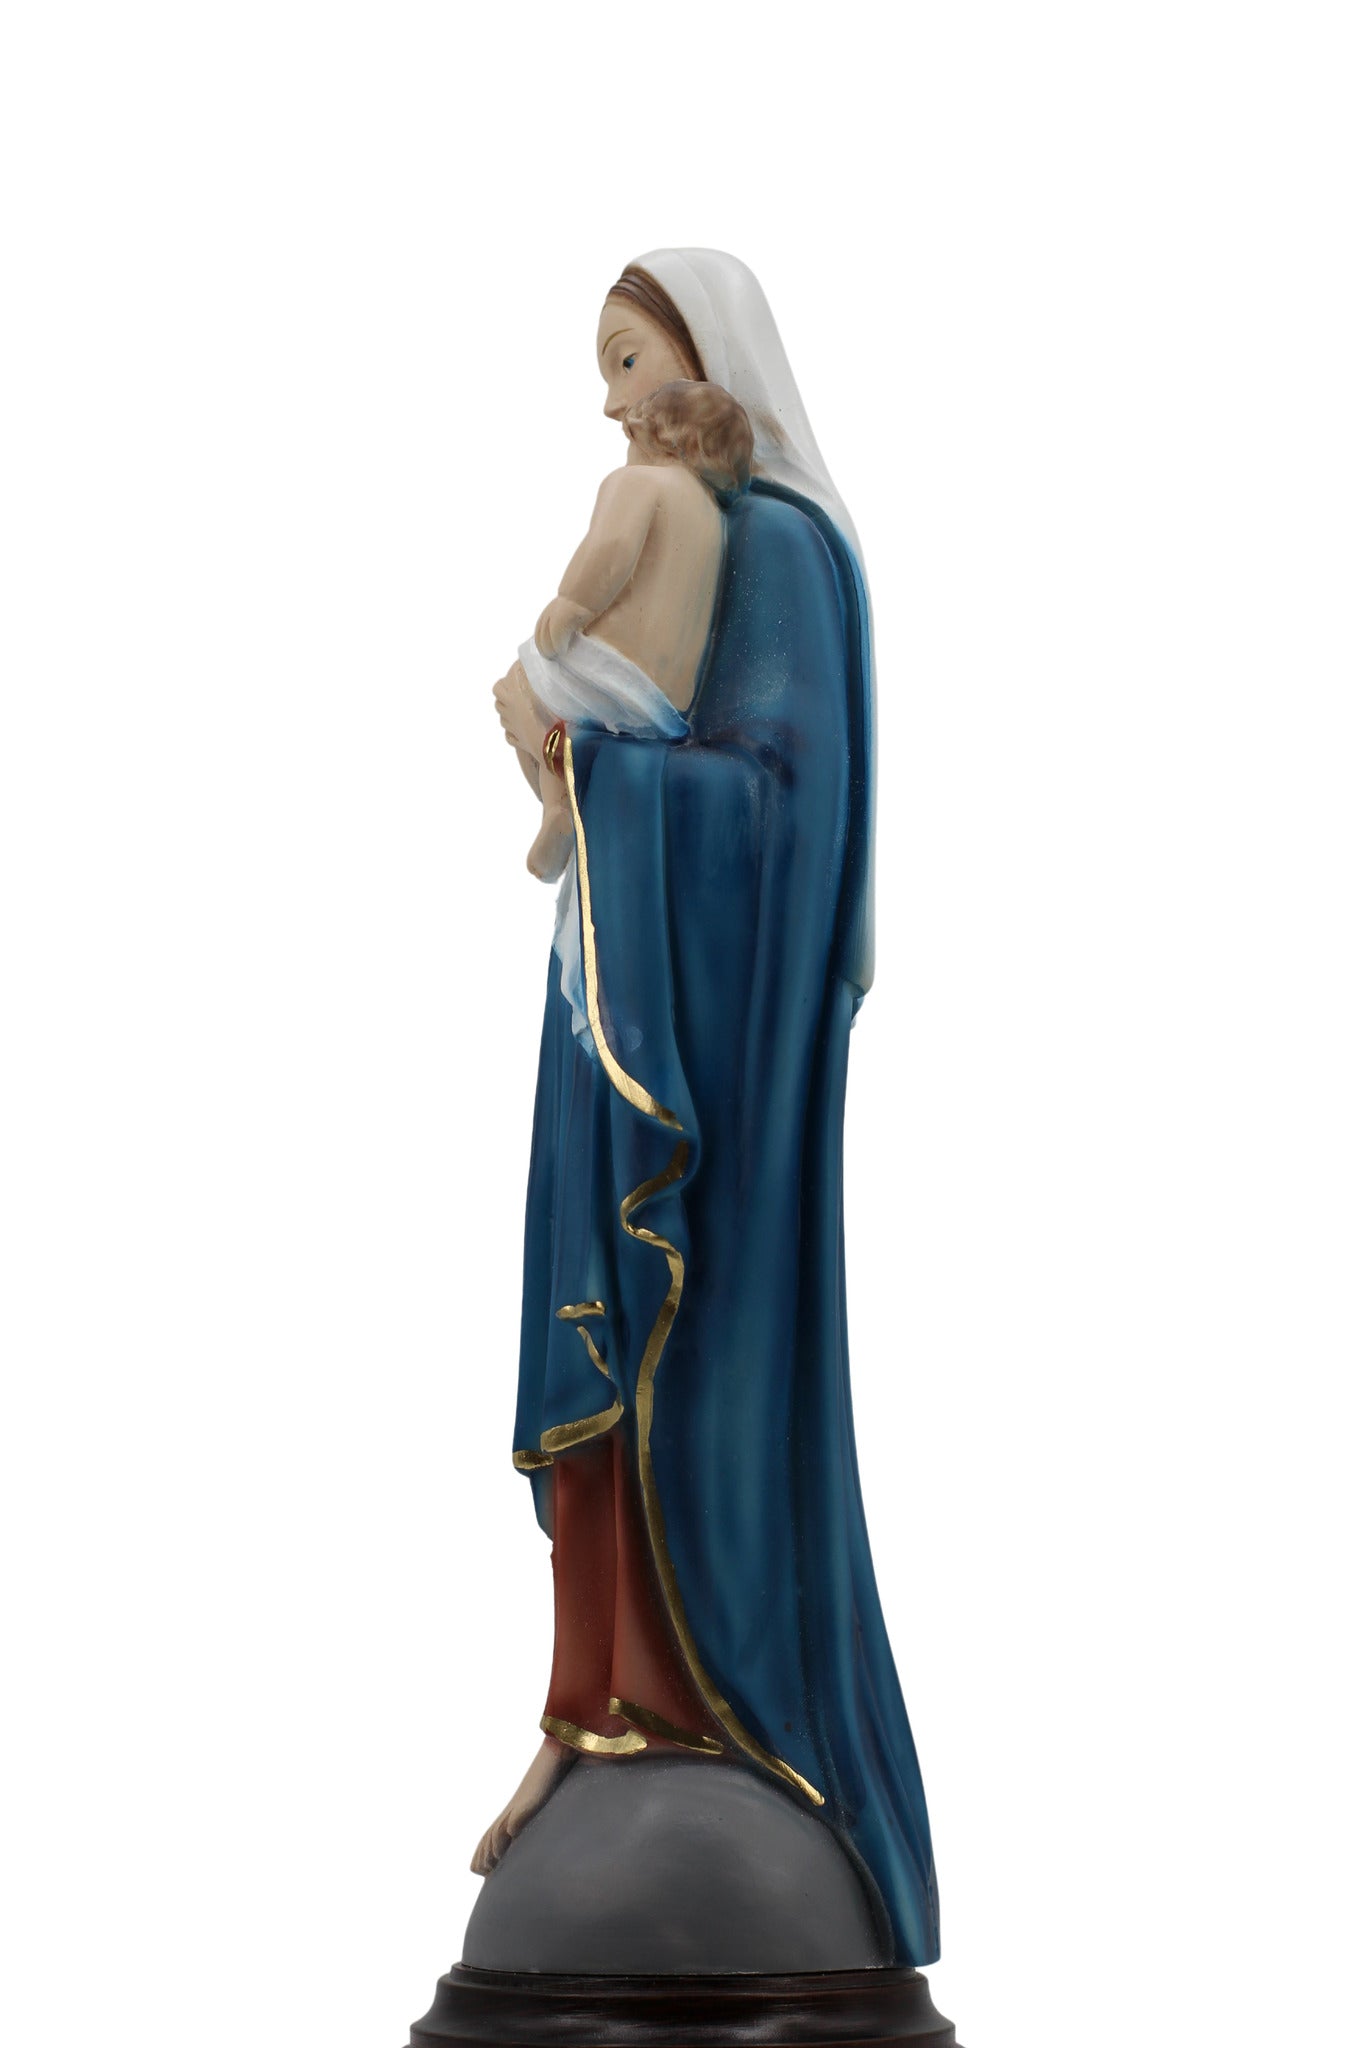 Virgin Mary and Child Jesus Over the World by The Faith Gift Collection